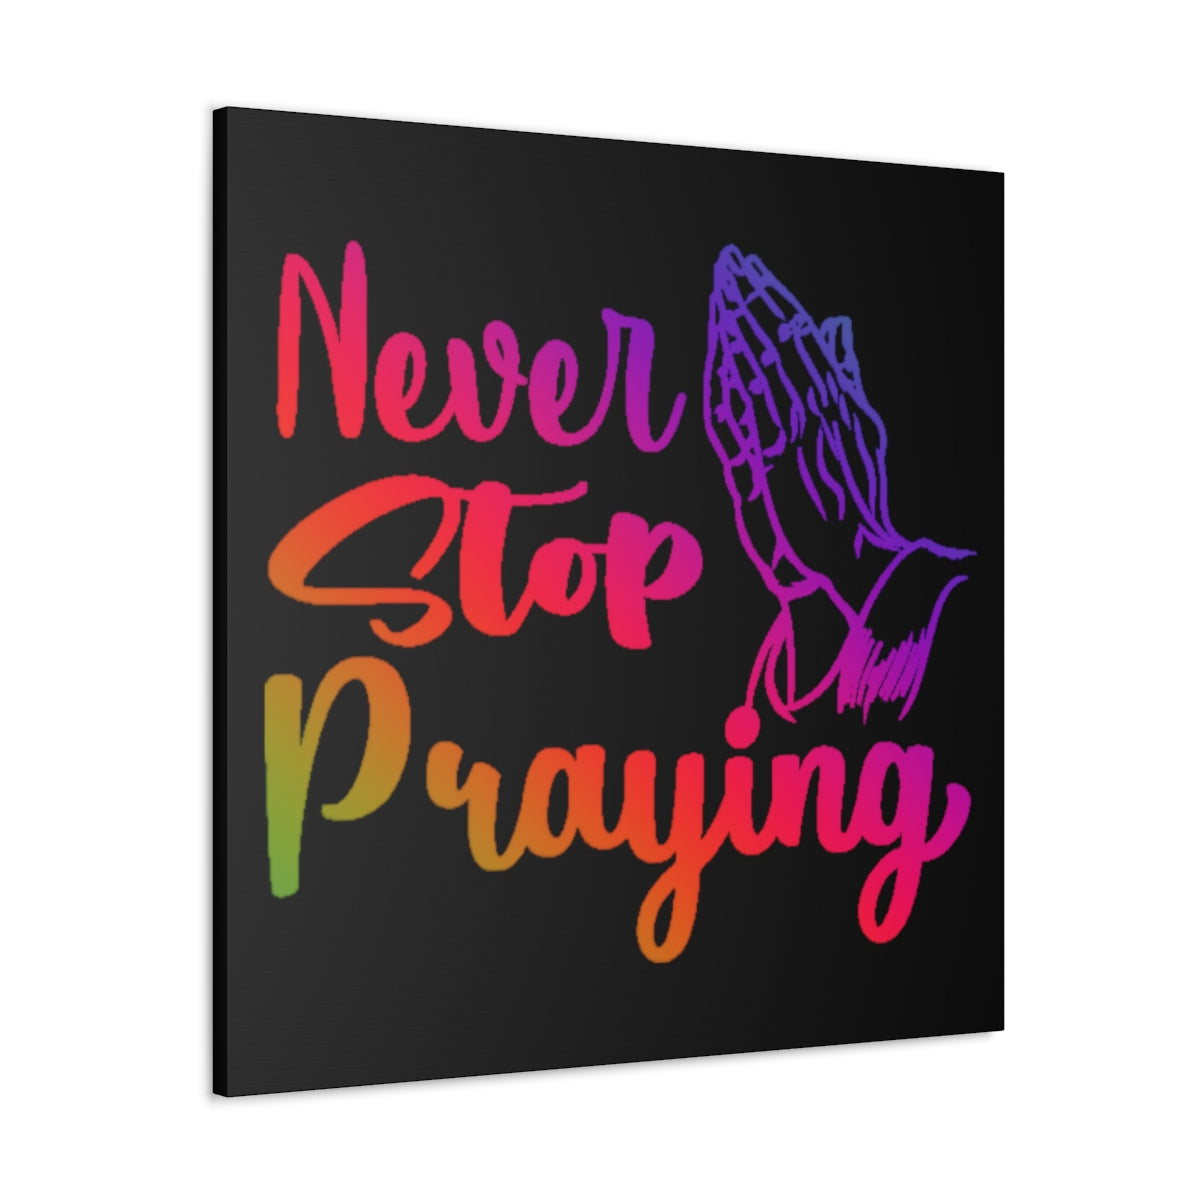 Never Stop Praying - Canvas Gallery Wrapped Prints